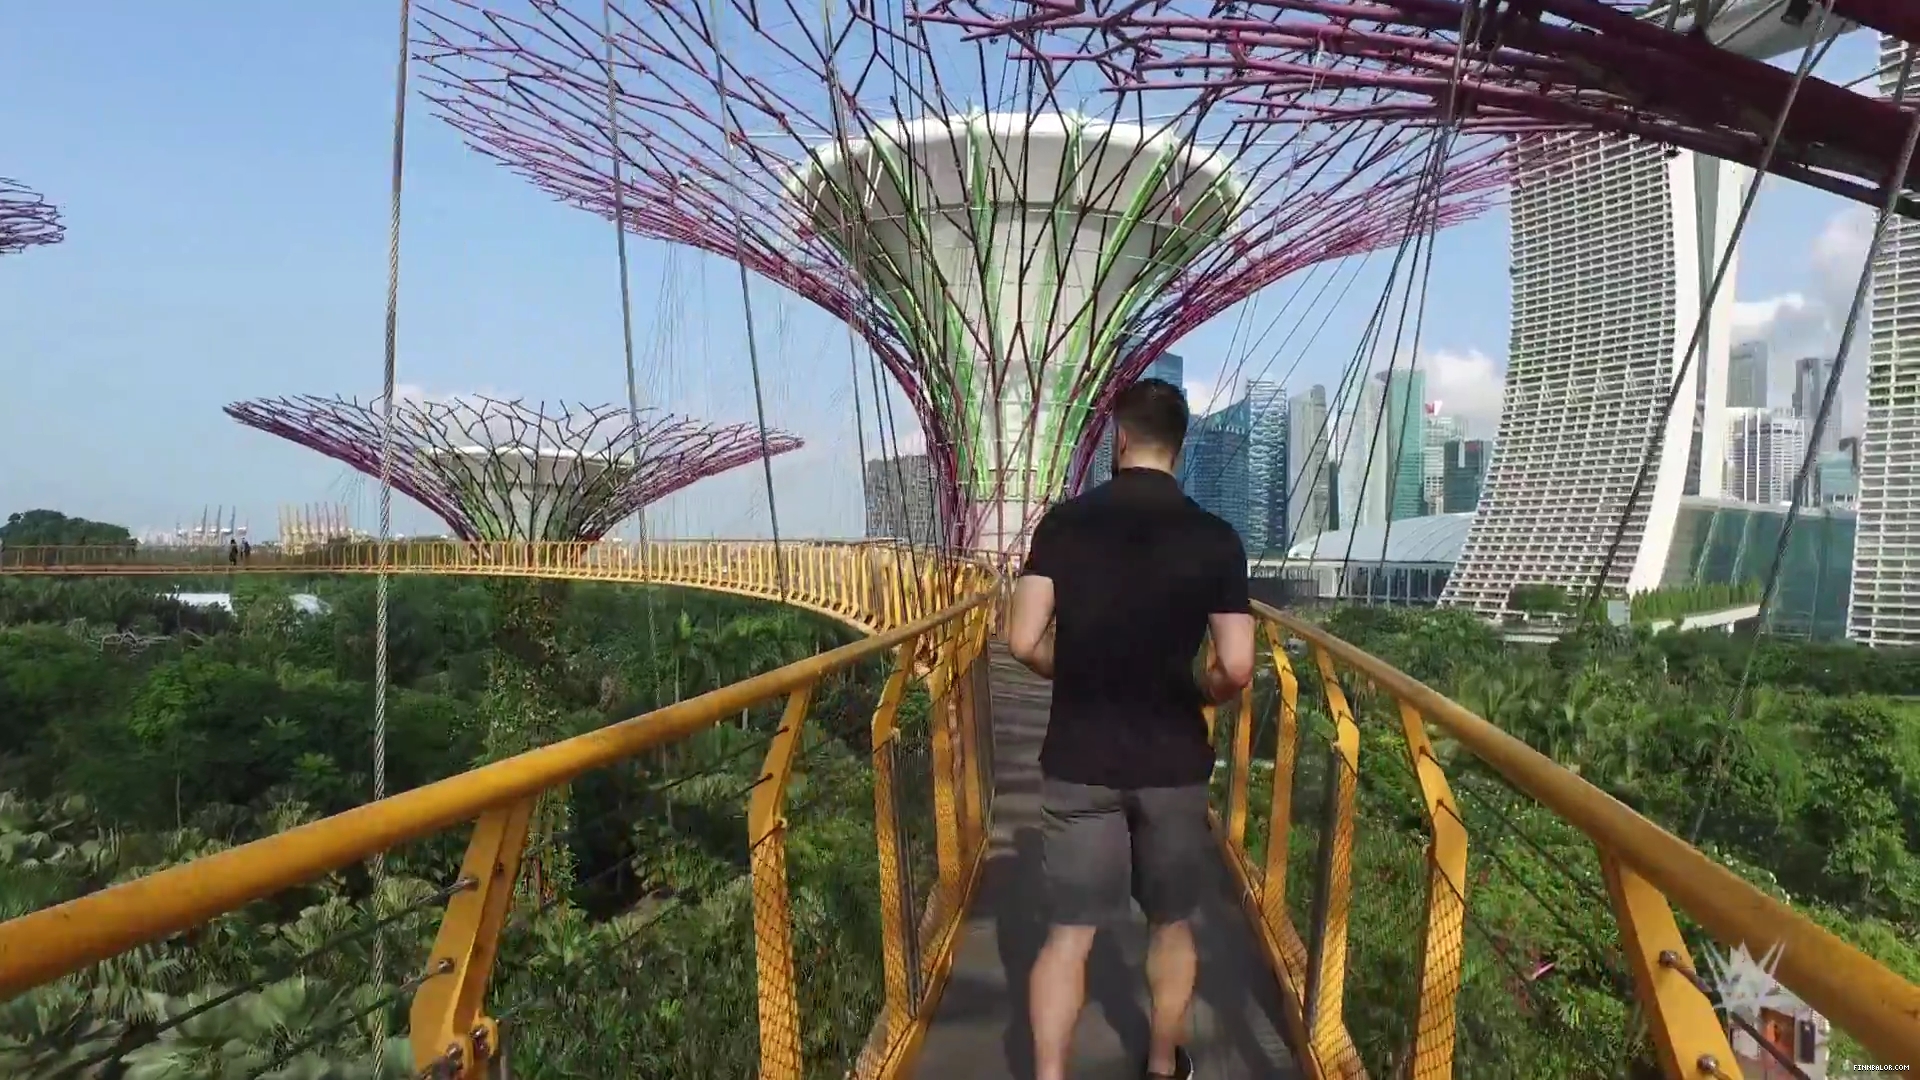 Finn_Balor_feels_like_he_is_in__Star_Wars__while_touring_Singapore_s_Supertree__mp40006.jpg